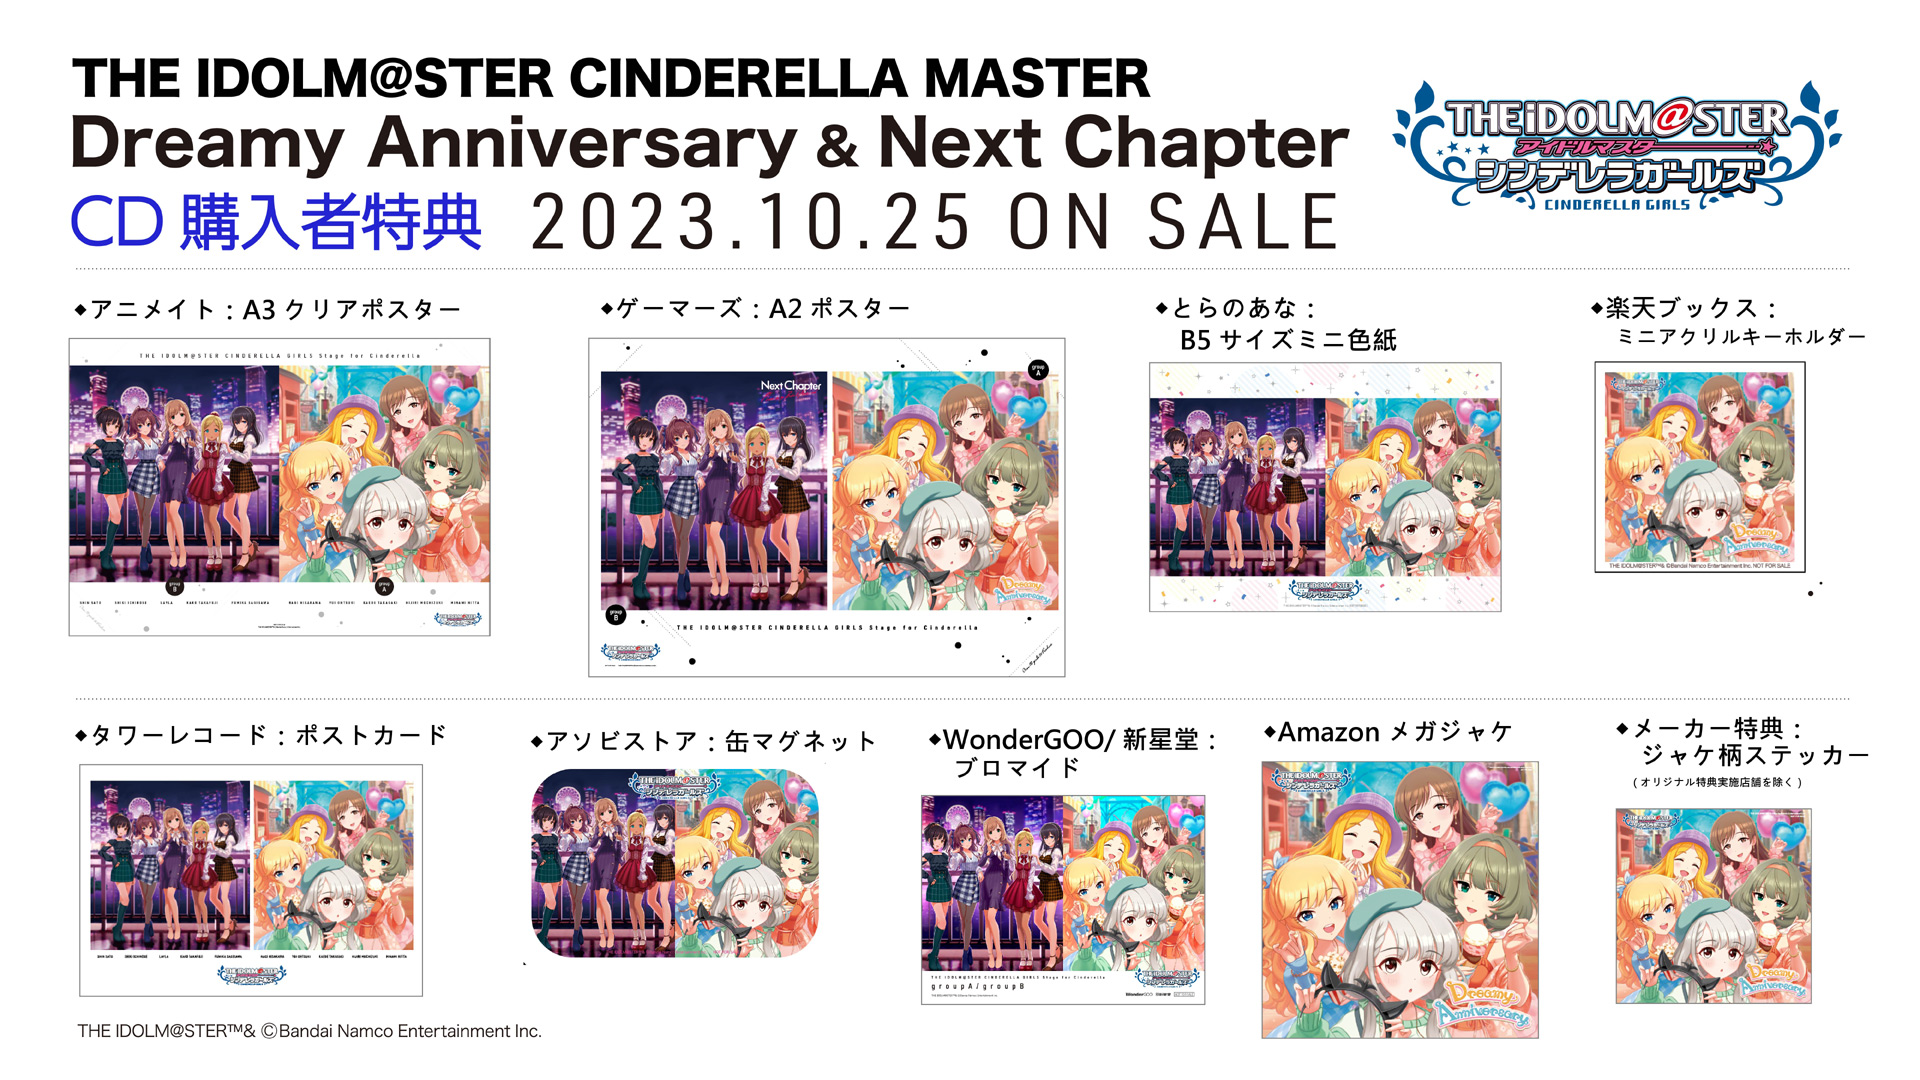 THE IDOLM@STER CINDERELLA MASTER Dreamy Anniversary & Next Chapter購入者特典